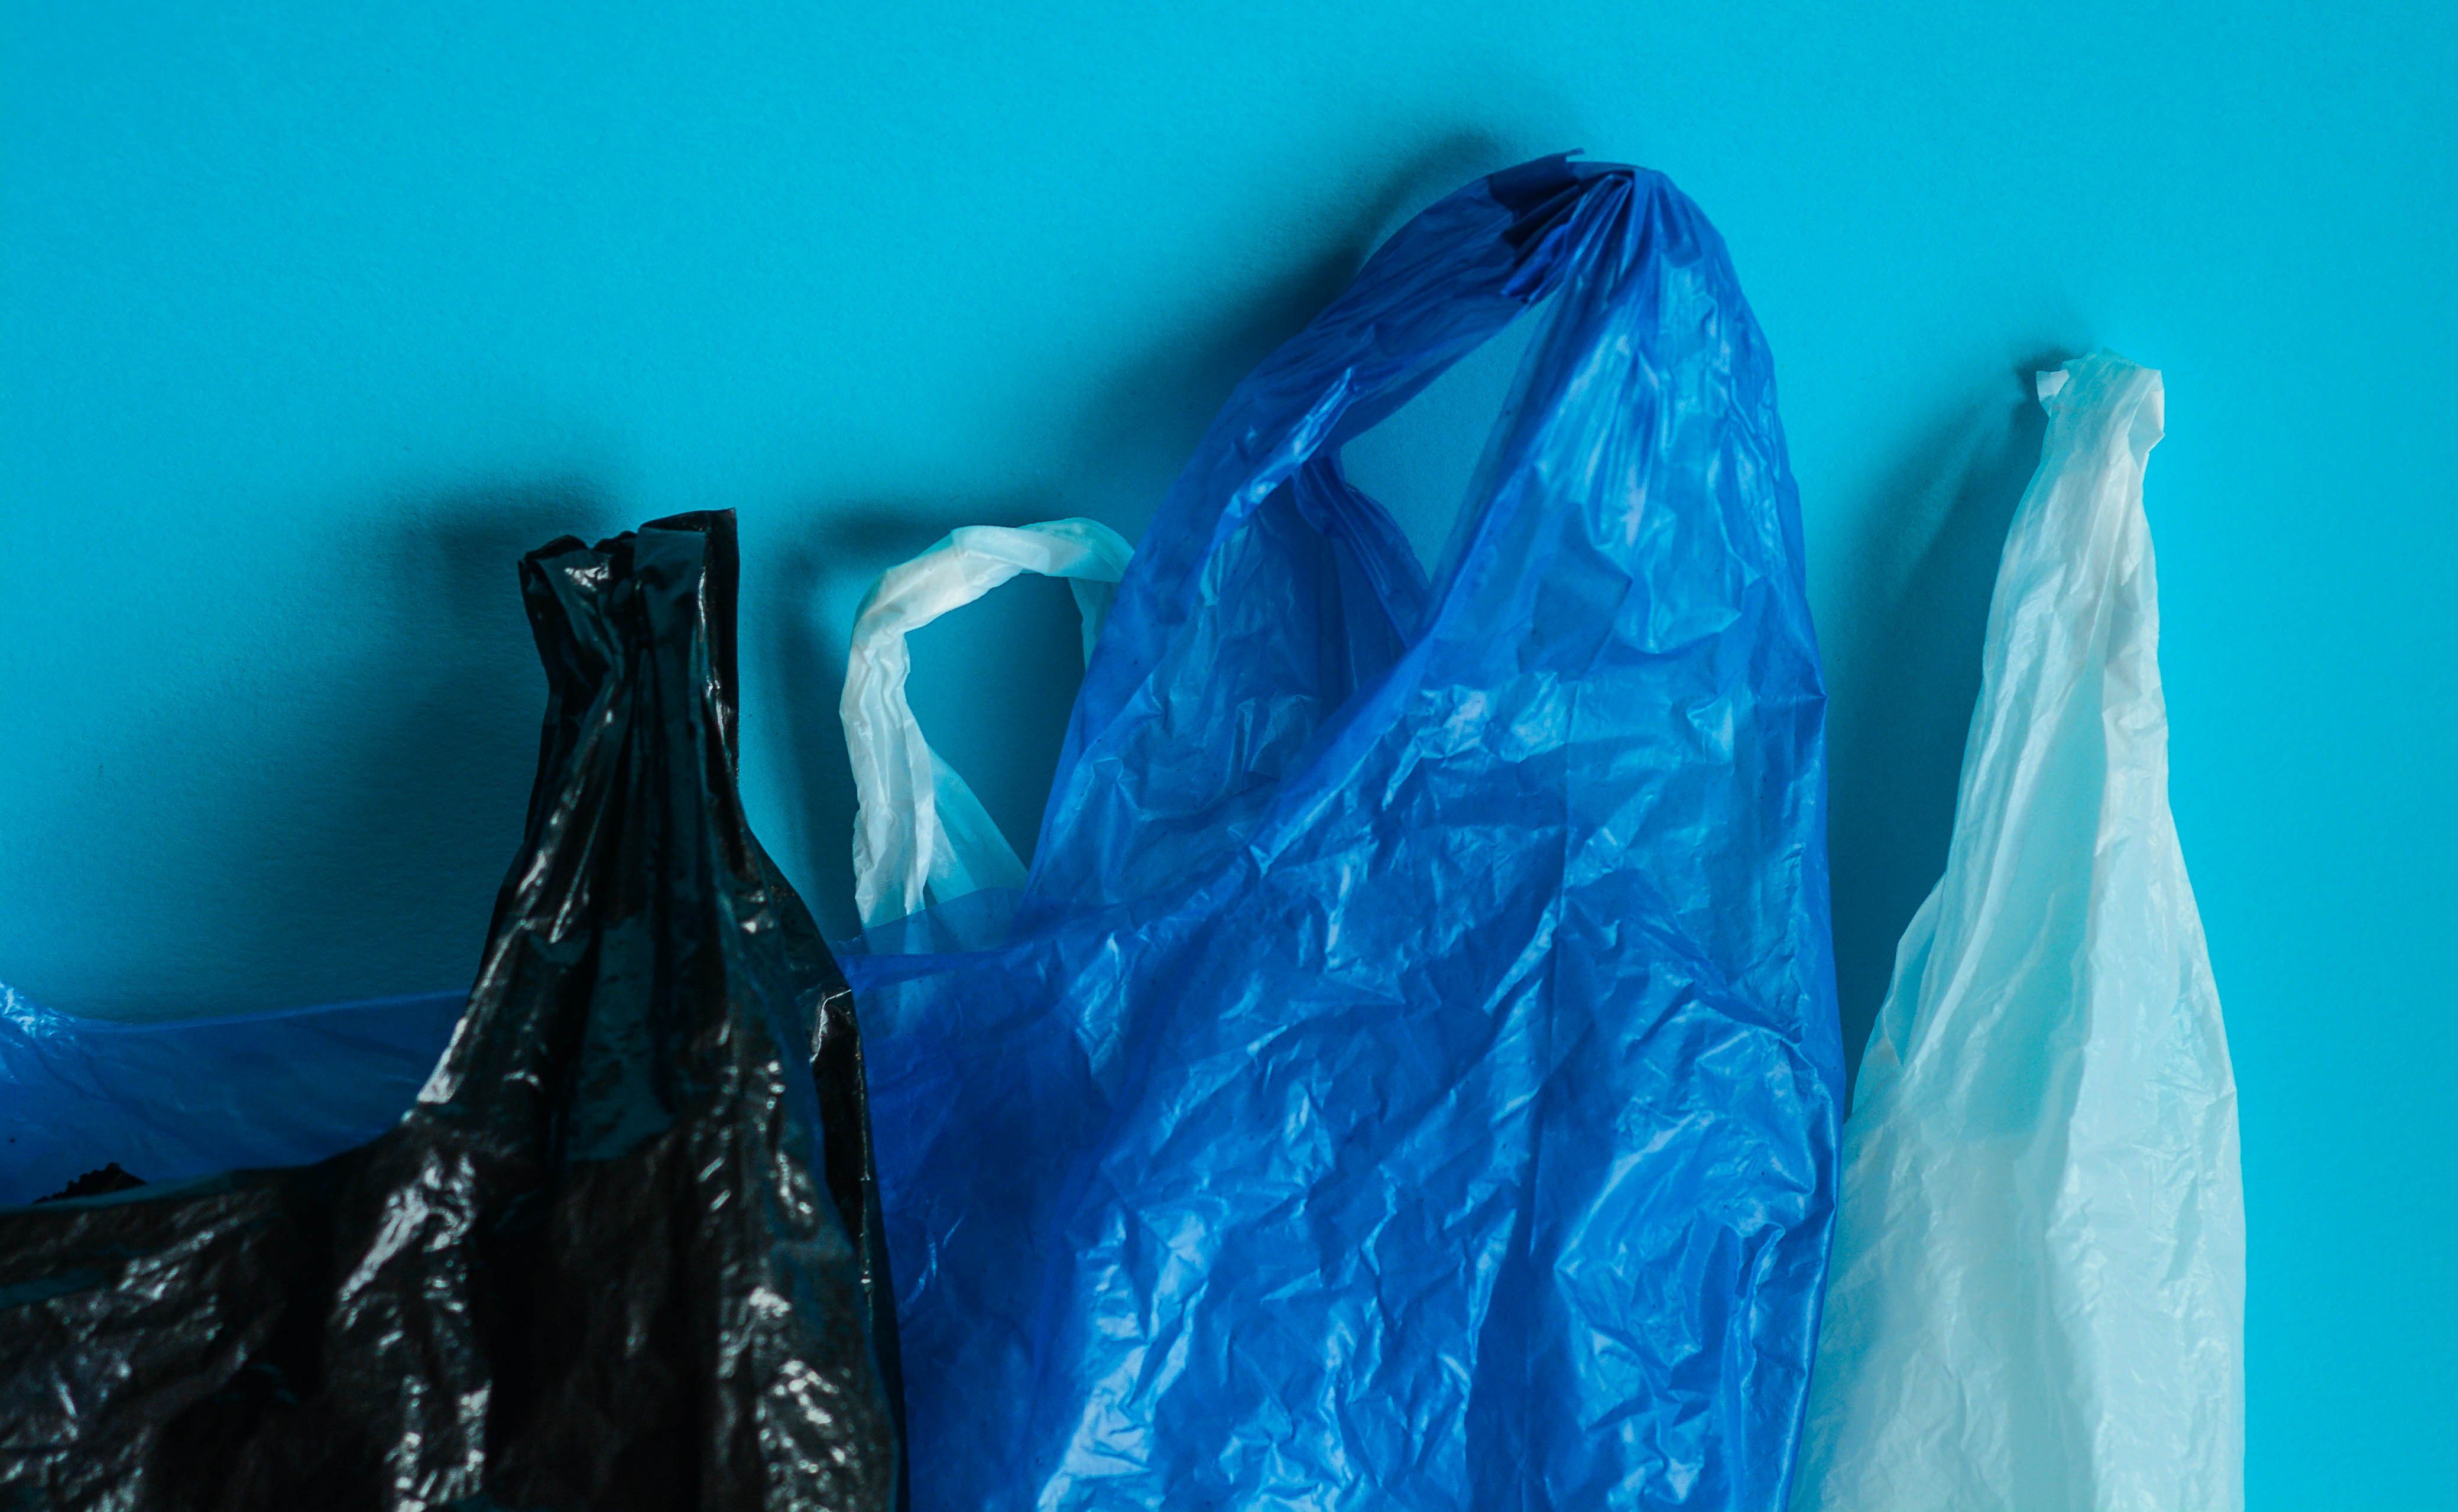 Black, blue and white plastic bags on blue background. Representation of plastic pollution concept